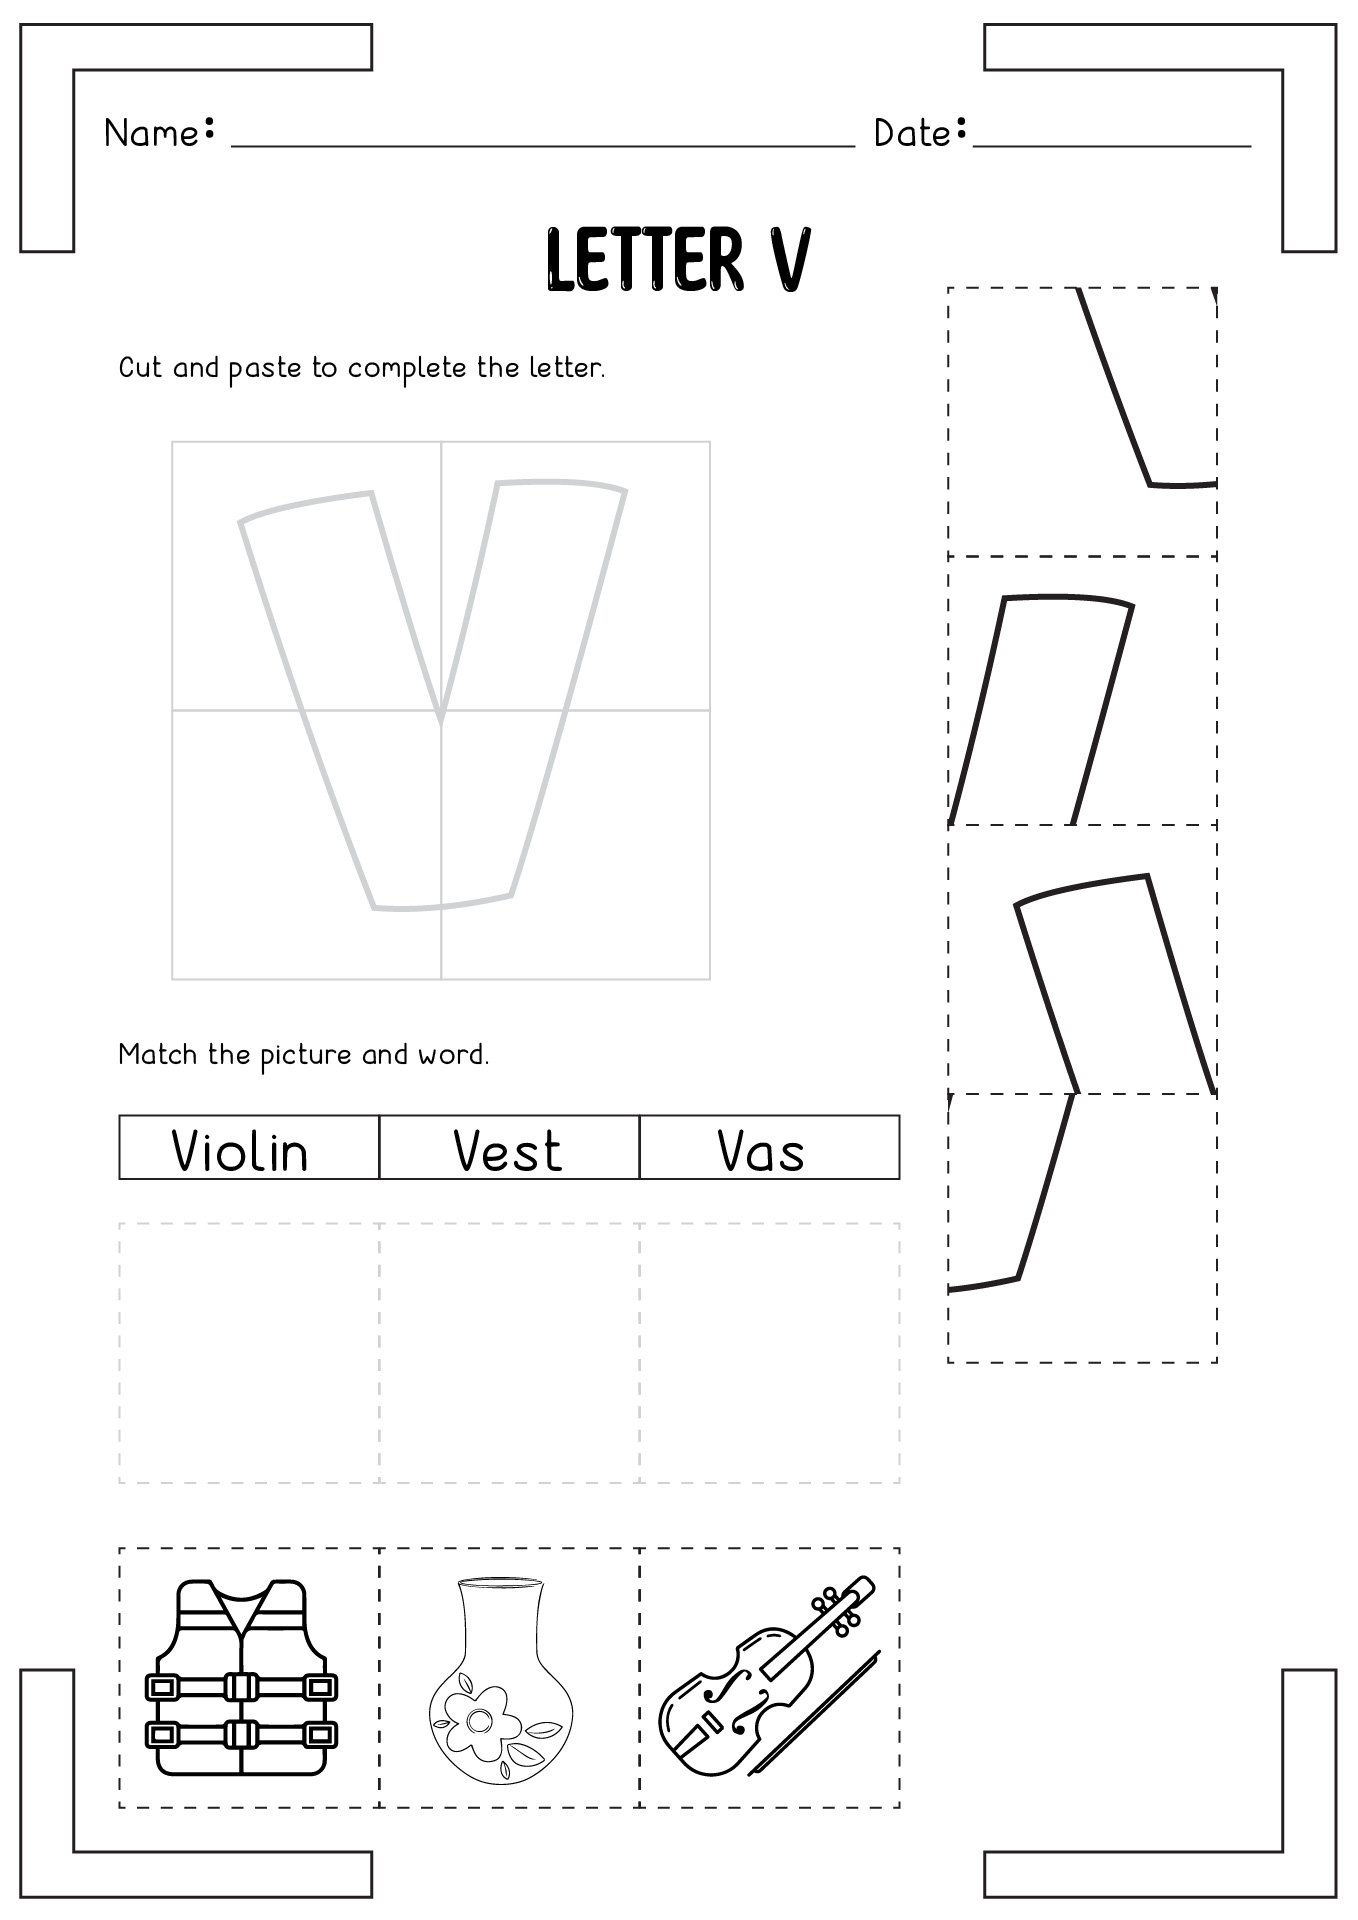 Cut and Paste Activities Letter V